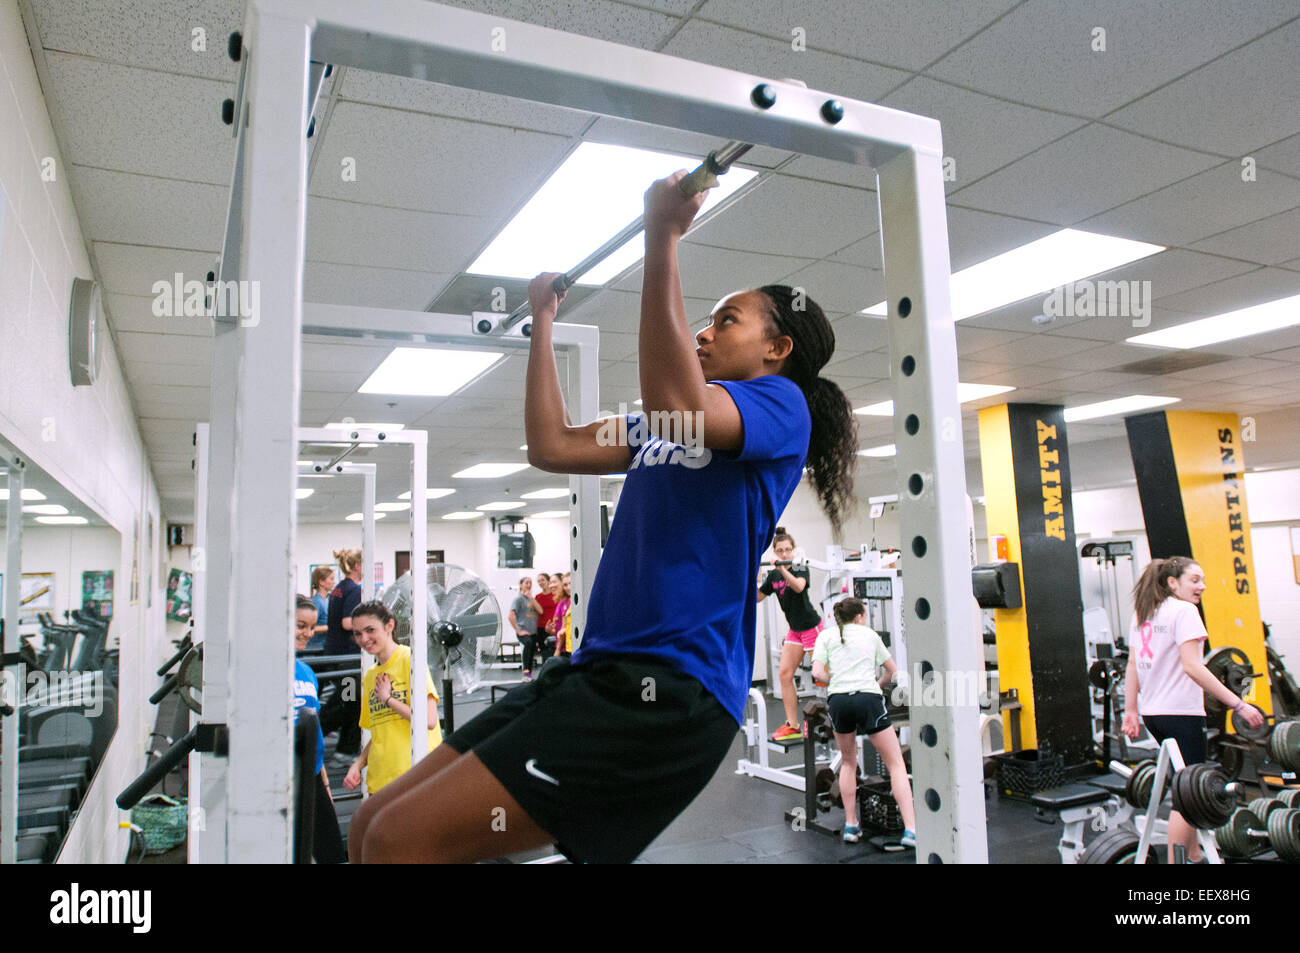 Sprinter/Long Jumper Zoie Reed does pull-ups in the weight room at Amity High. Amity does not have an indoor track so track and field members must get creative in their off season training. CT USA Stock Photo